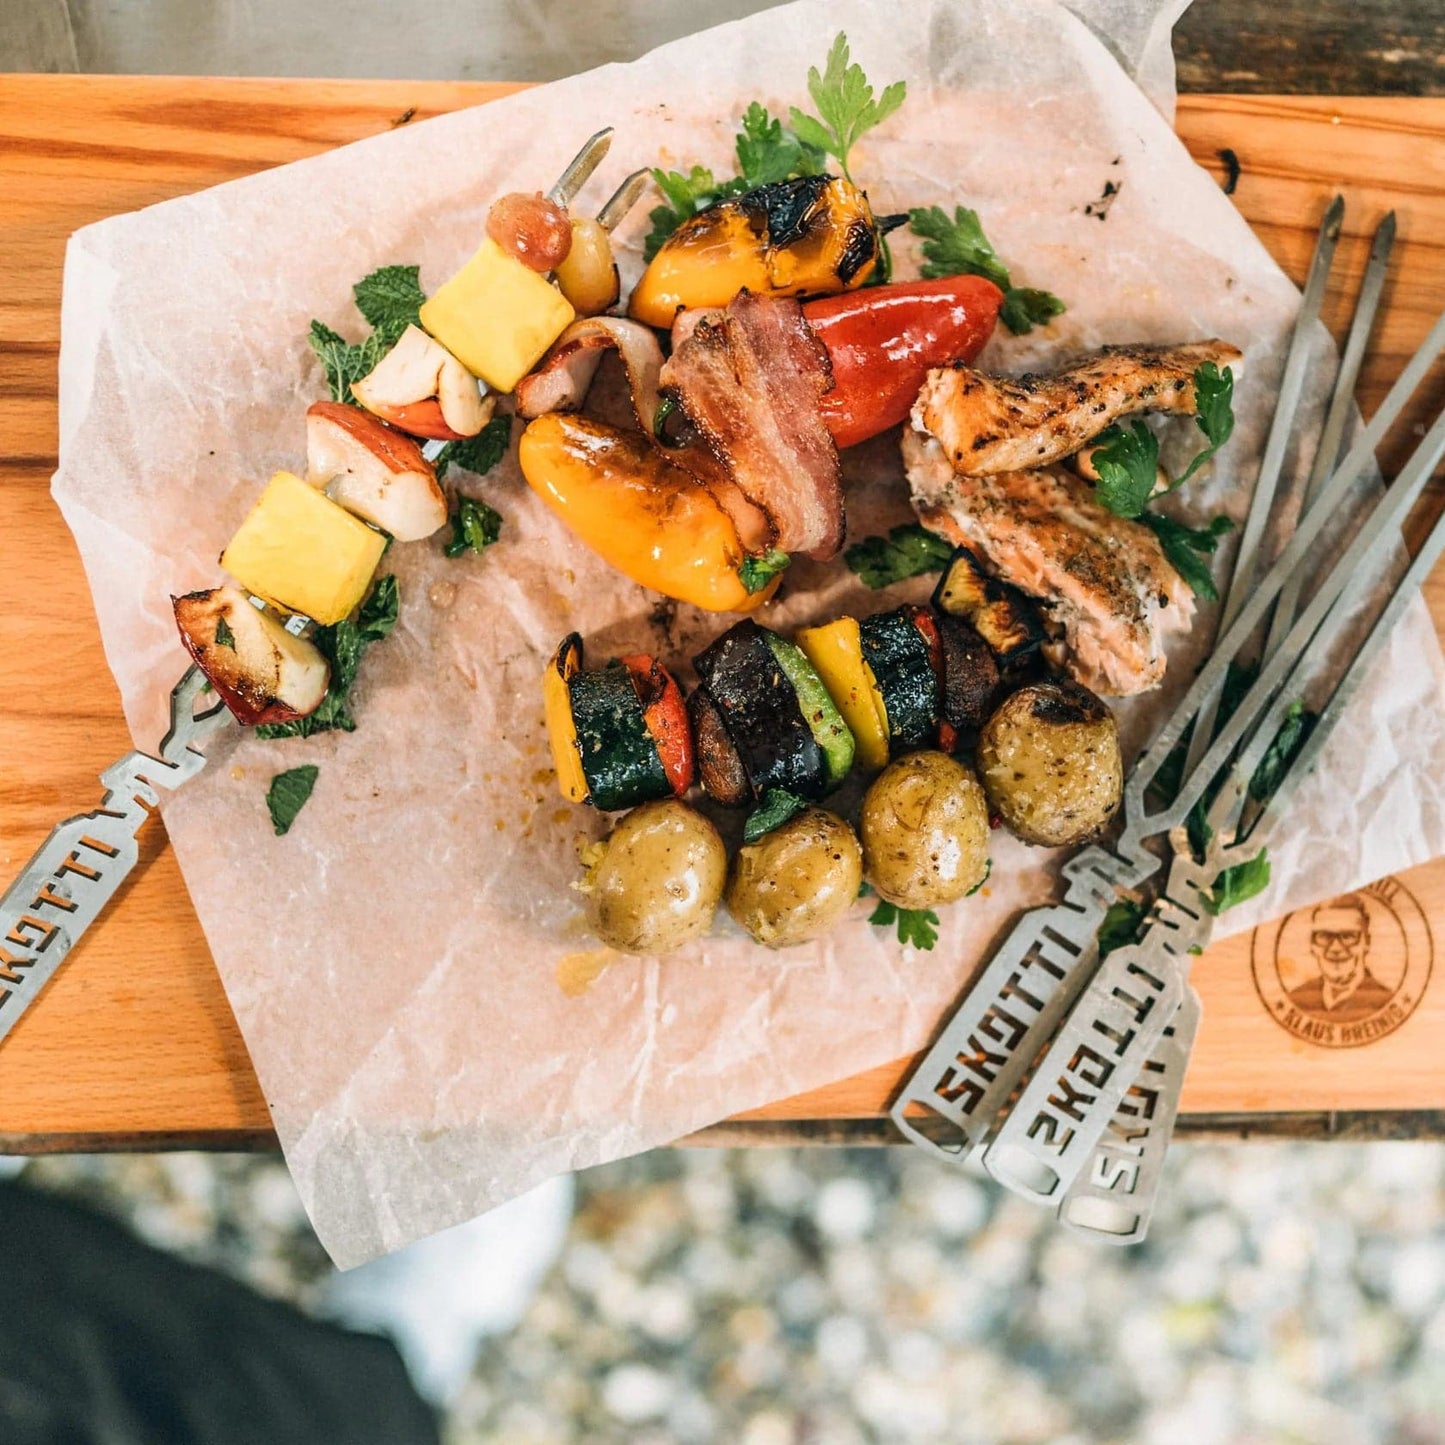 delicious chicken skewers and vegetable skewers made with skotti pikes